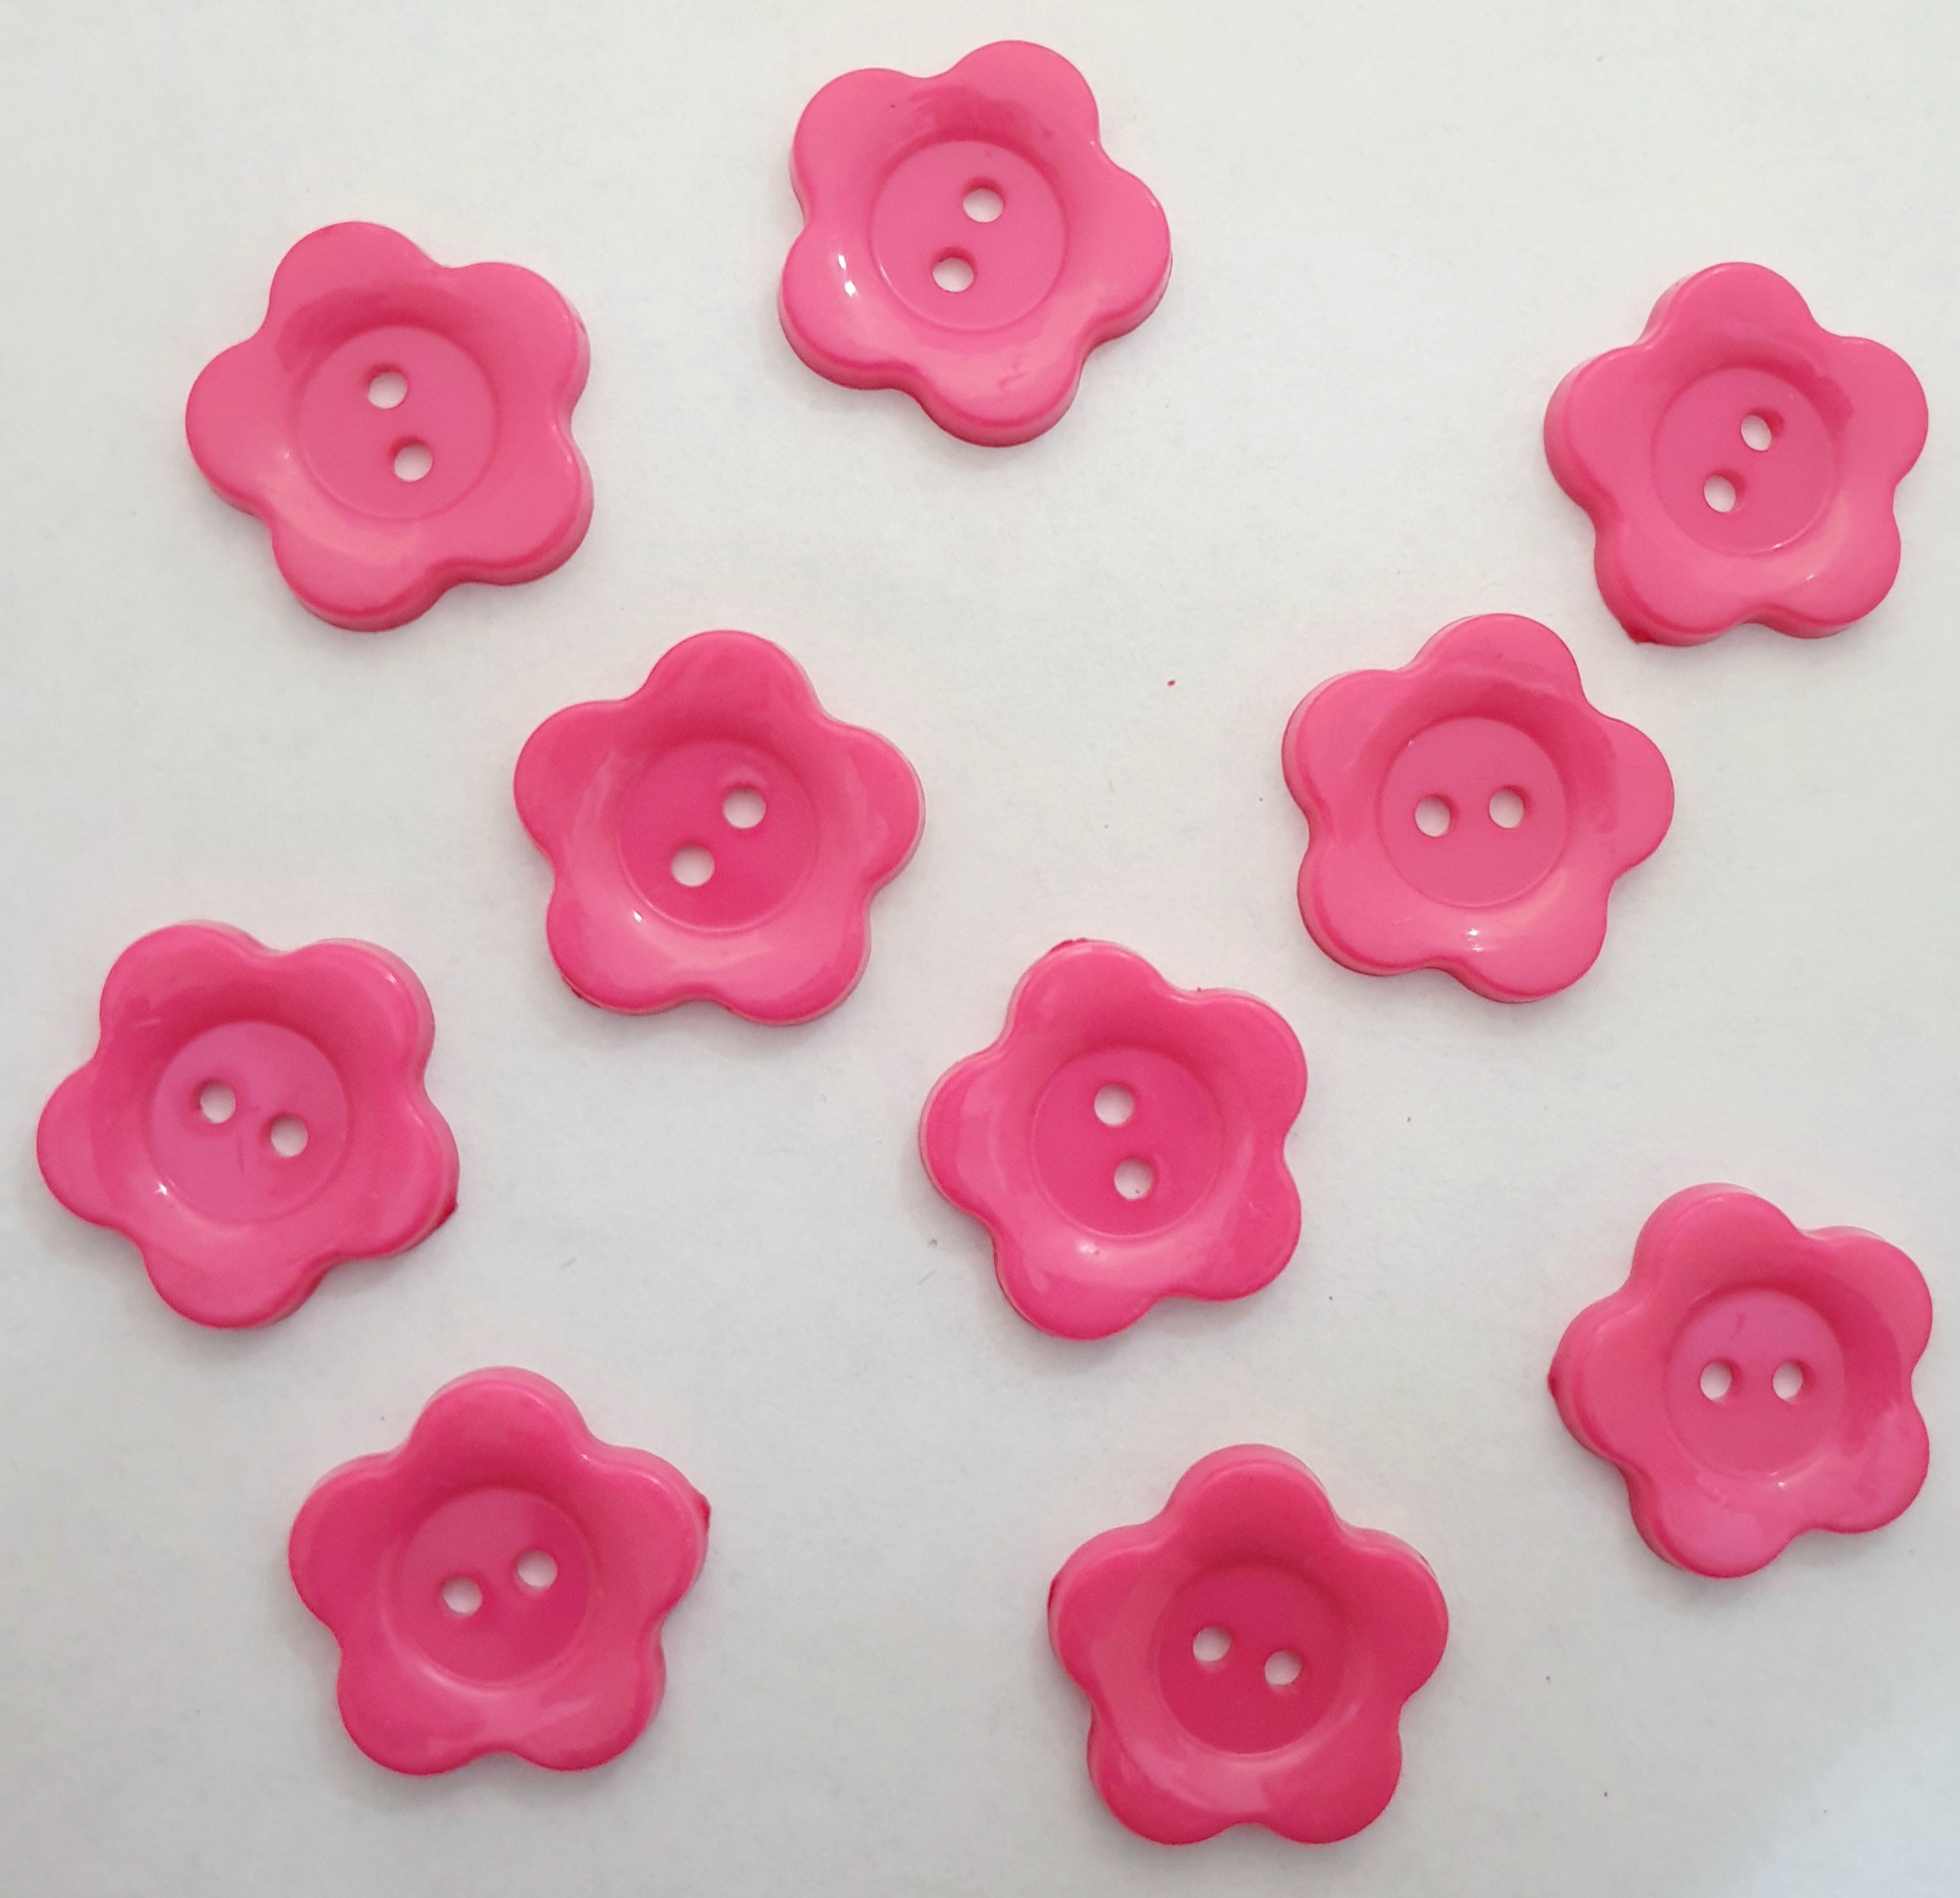 MajorCrafts 34pcs 22mm Hot Pink Flower Shaped 2 Holes Resin Sew-on Buttons